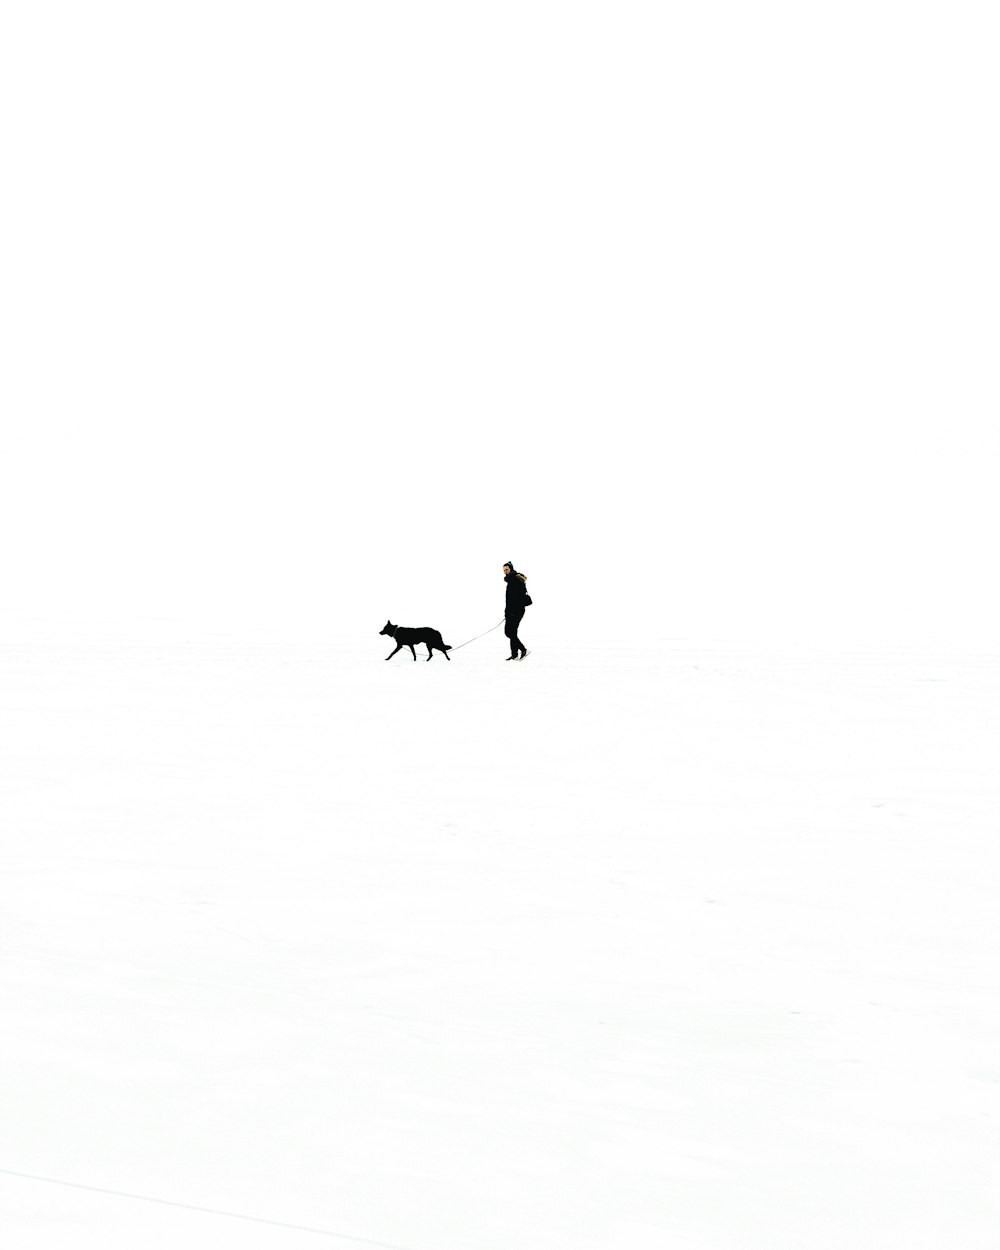 person walking with dog against black background